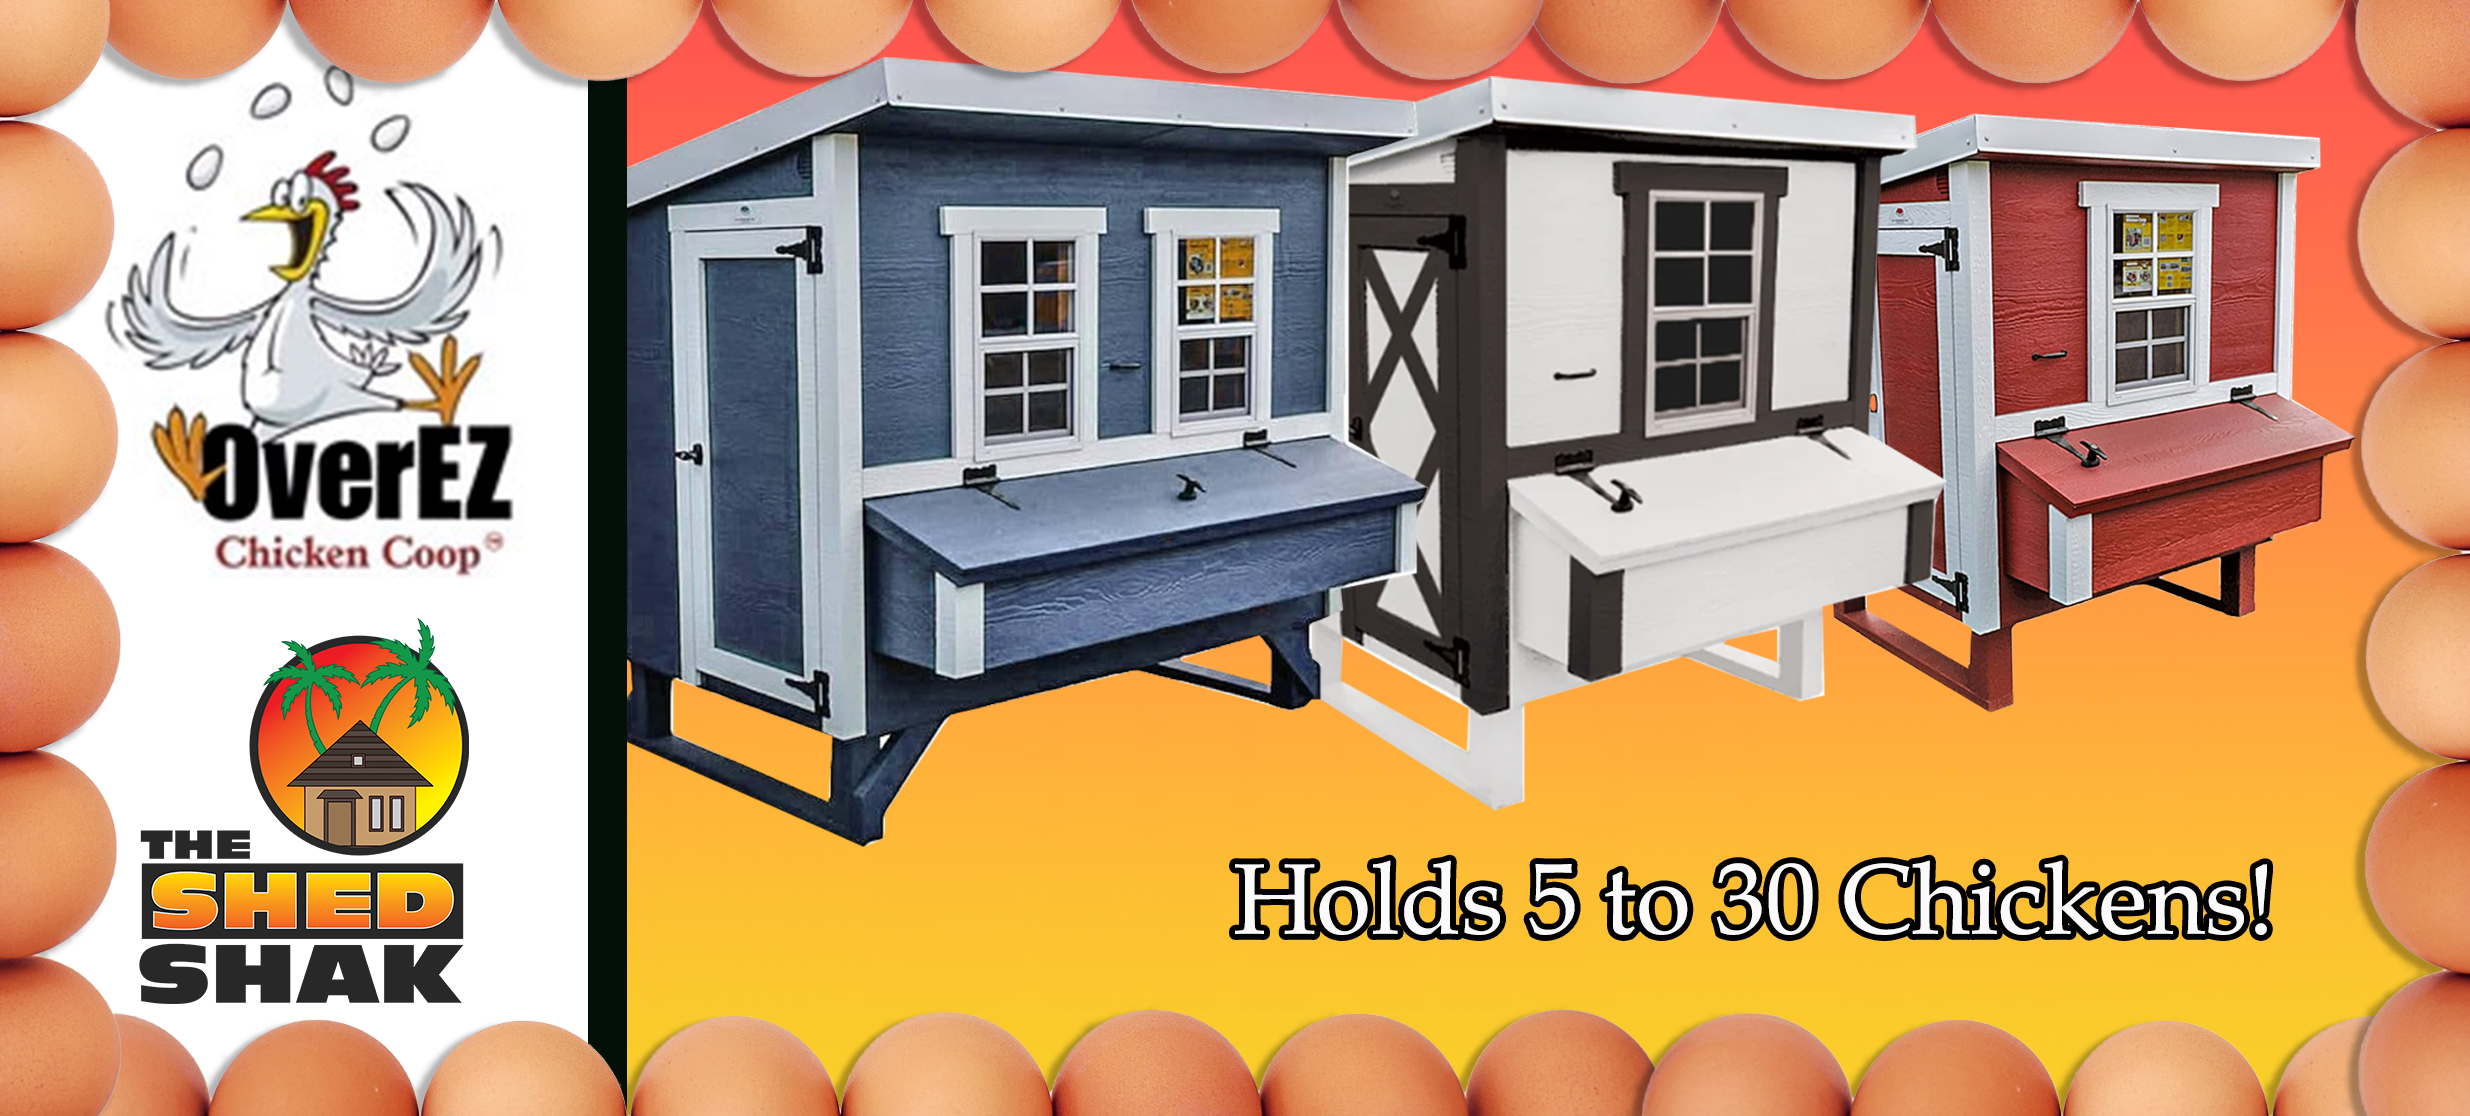 Banner | Shed Shak Offers OverEZ Chicken Coop Products!